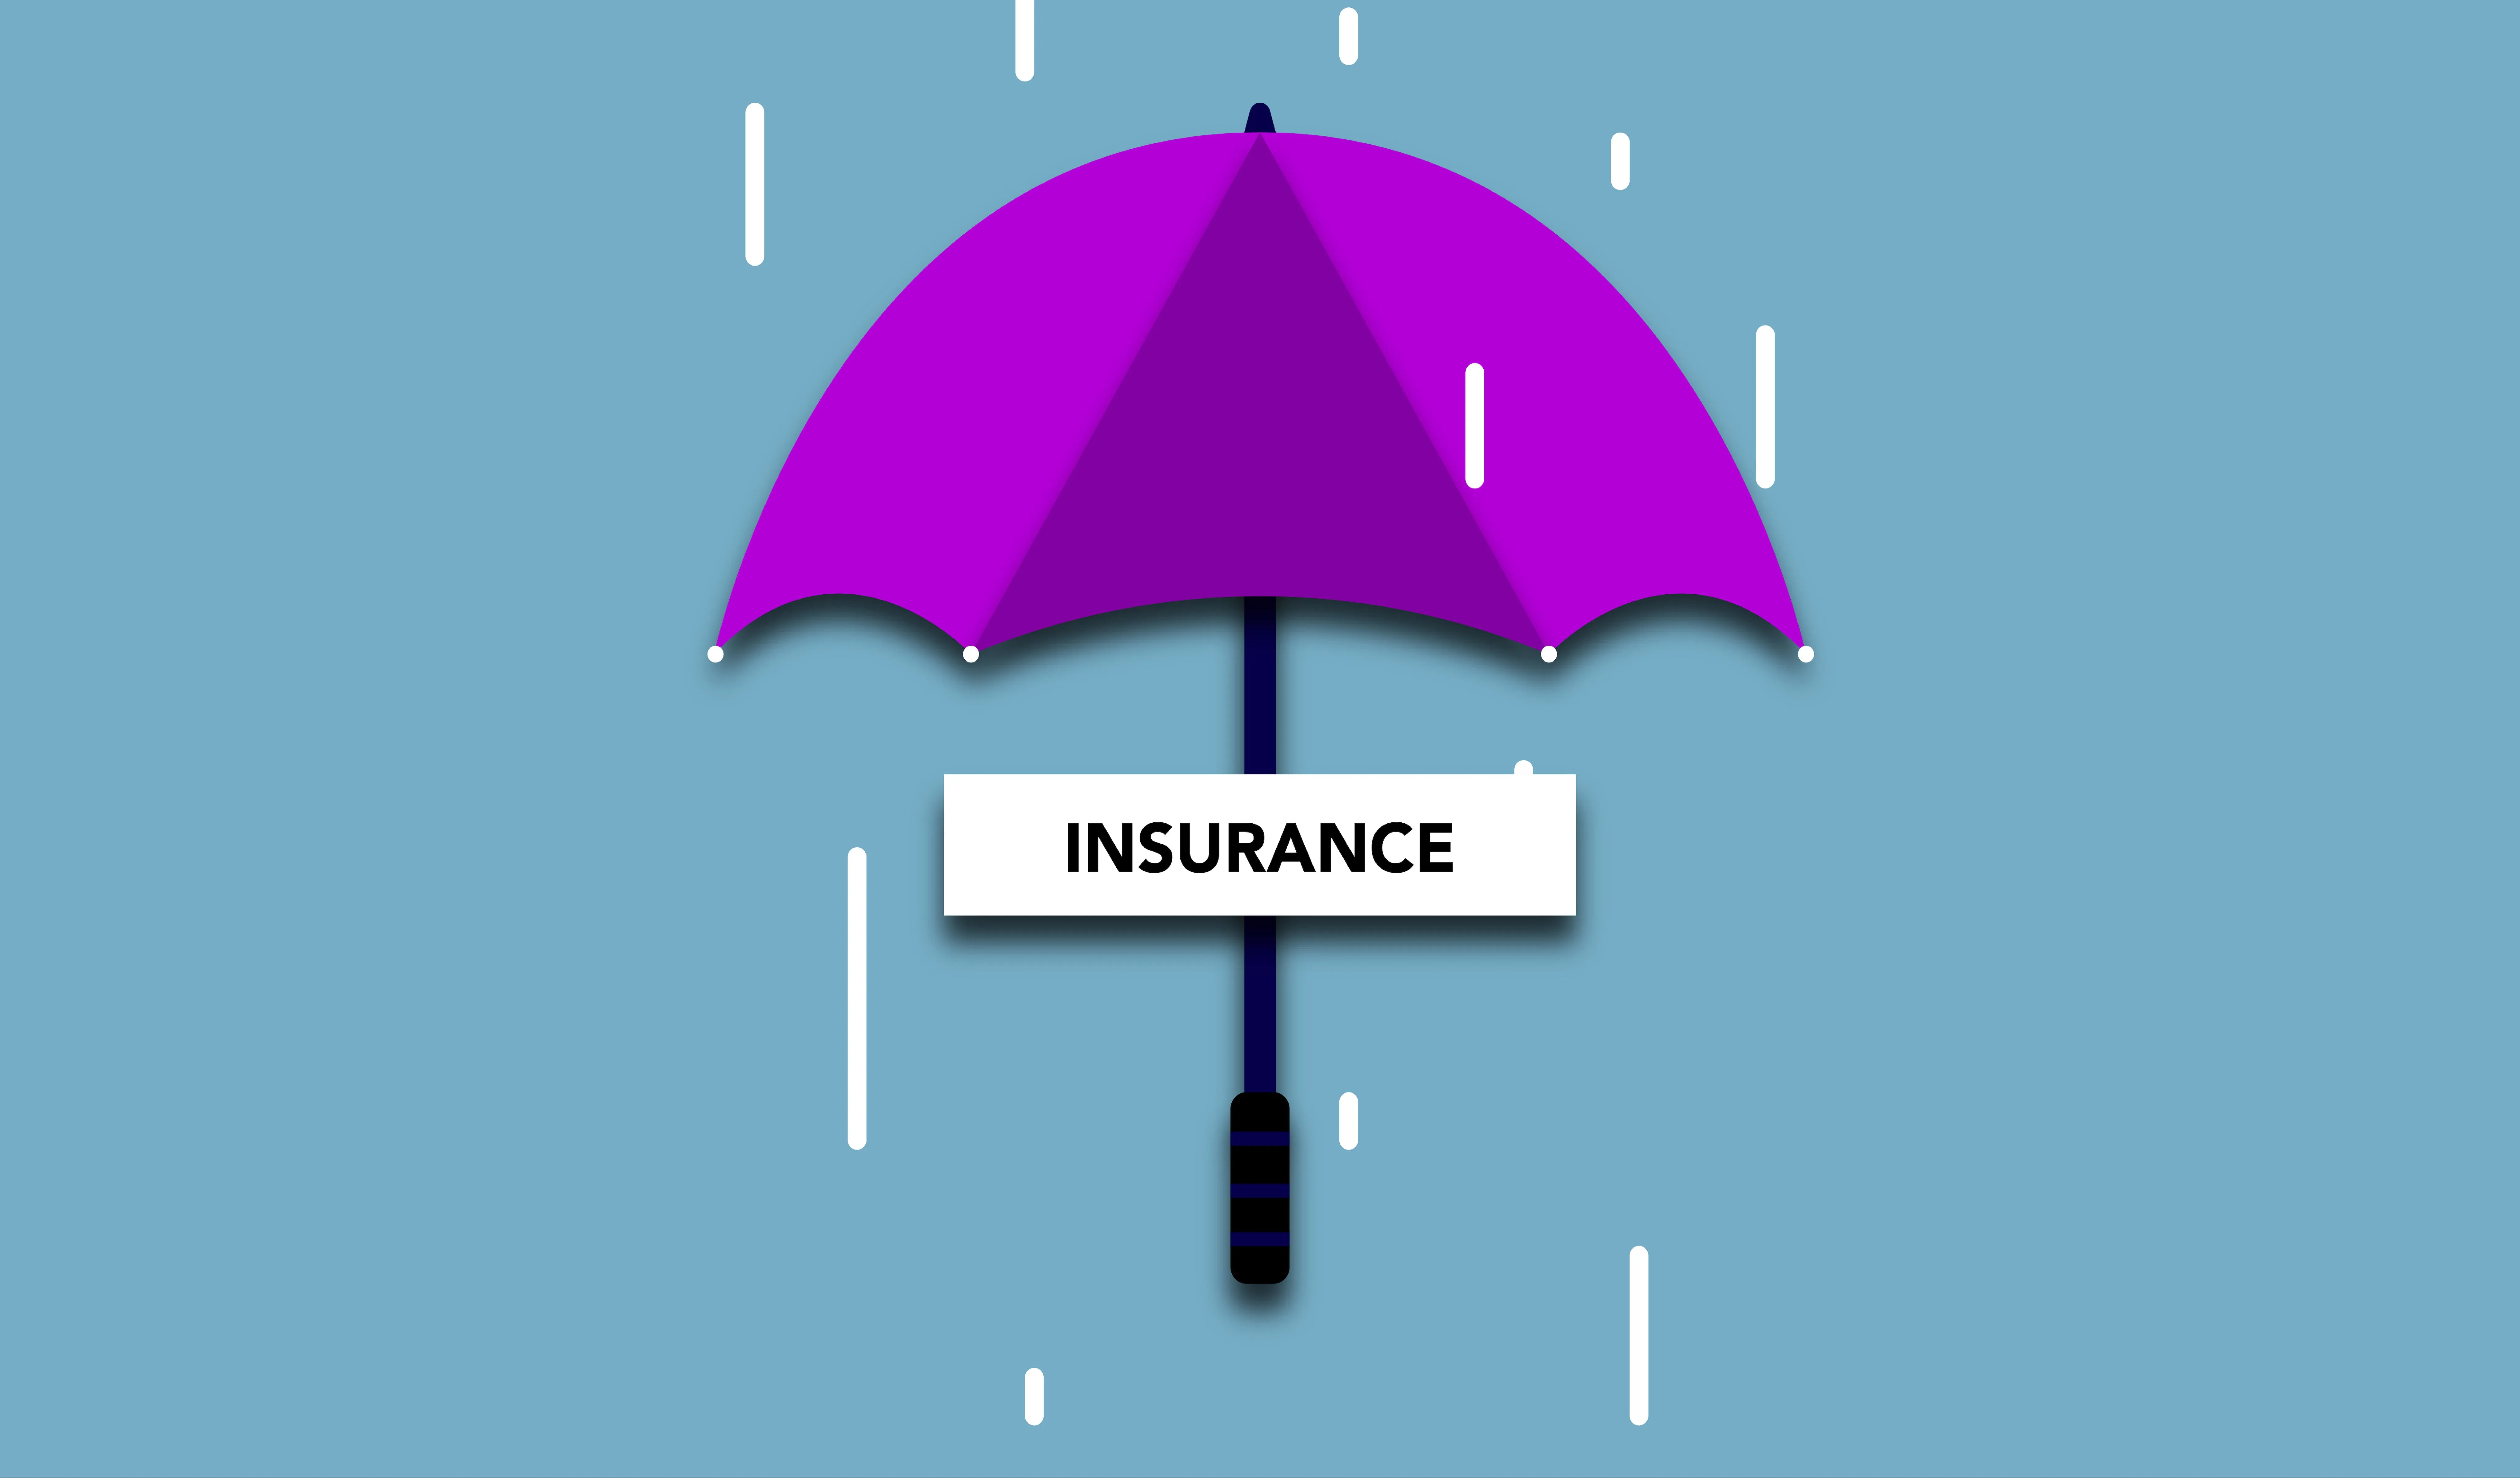 How to Handle Insurance Claims Effectively